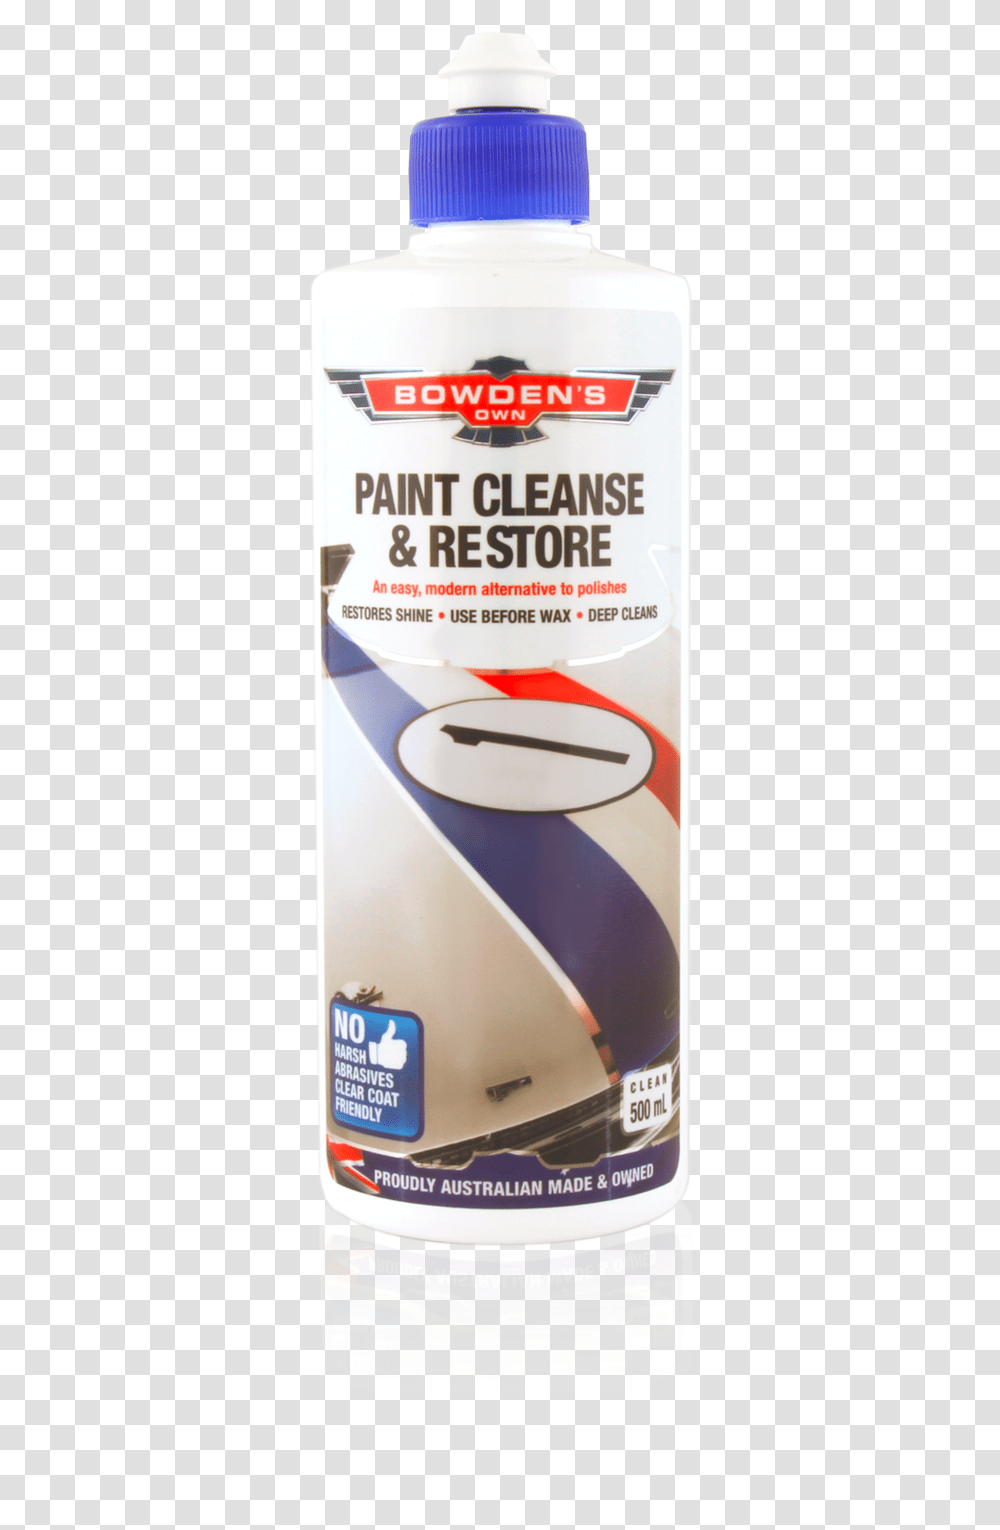 Bowdens Paint Cleanse And Restore, Bottle, Cosmetics, Can, Tin Transparent Png